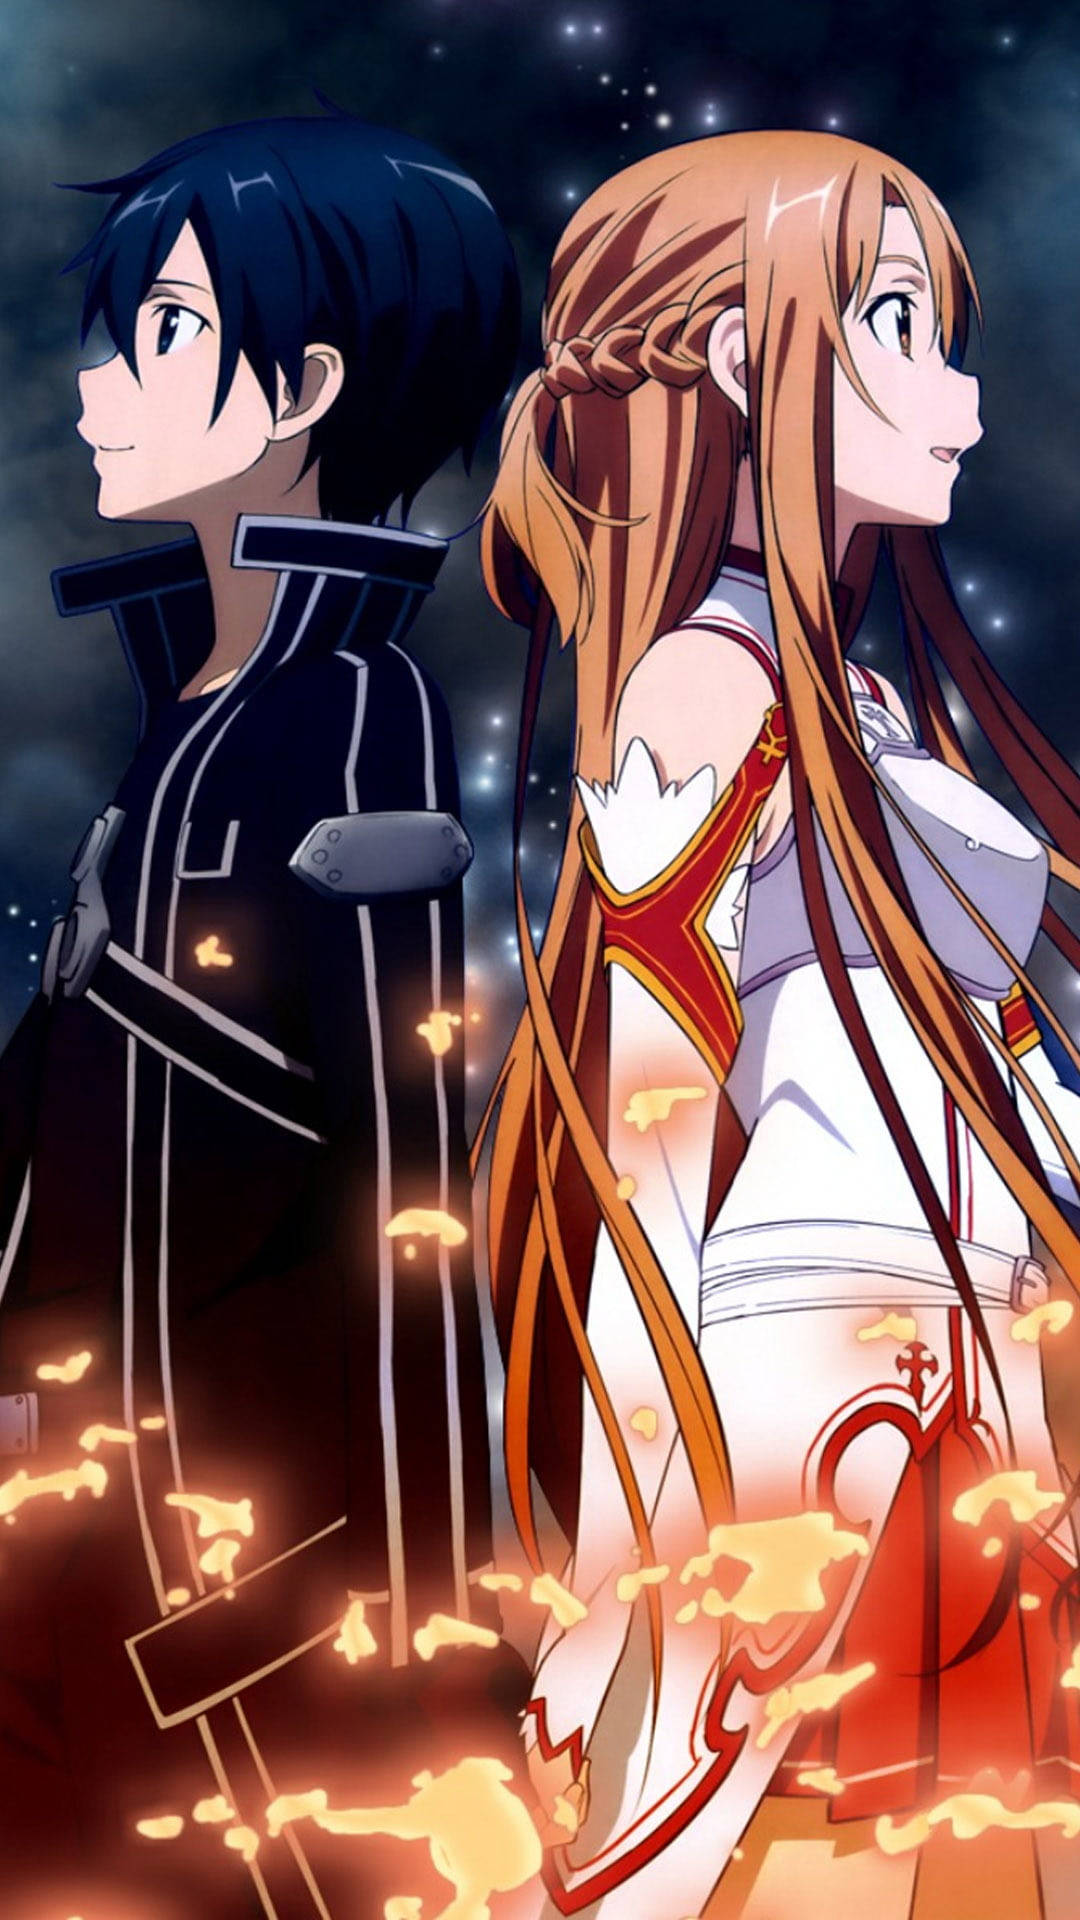 Enchanted Love Story In The Digital Realm - Kirito And Asuna From Sword Art Online Wallpaper